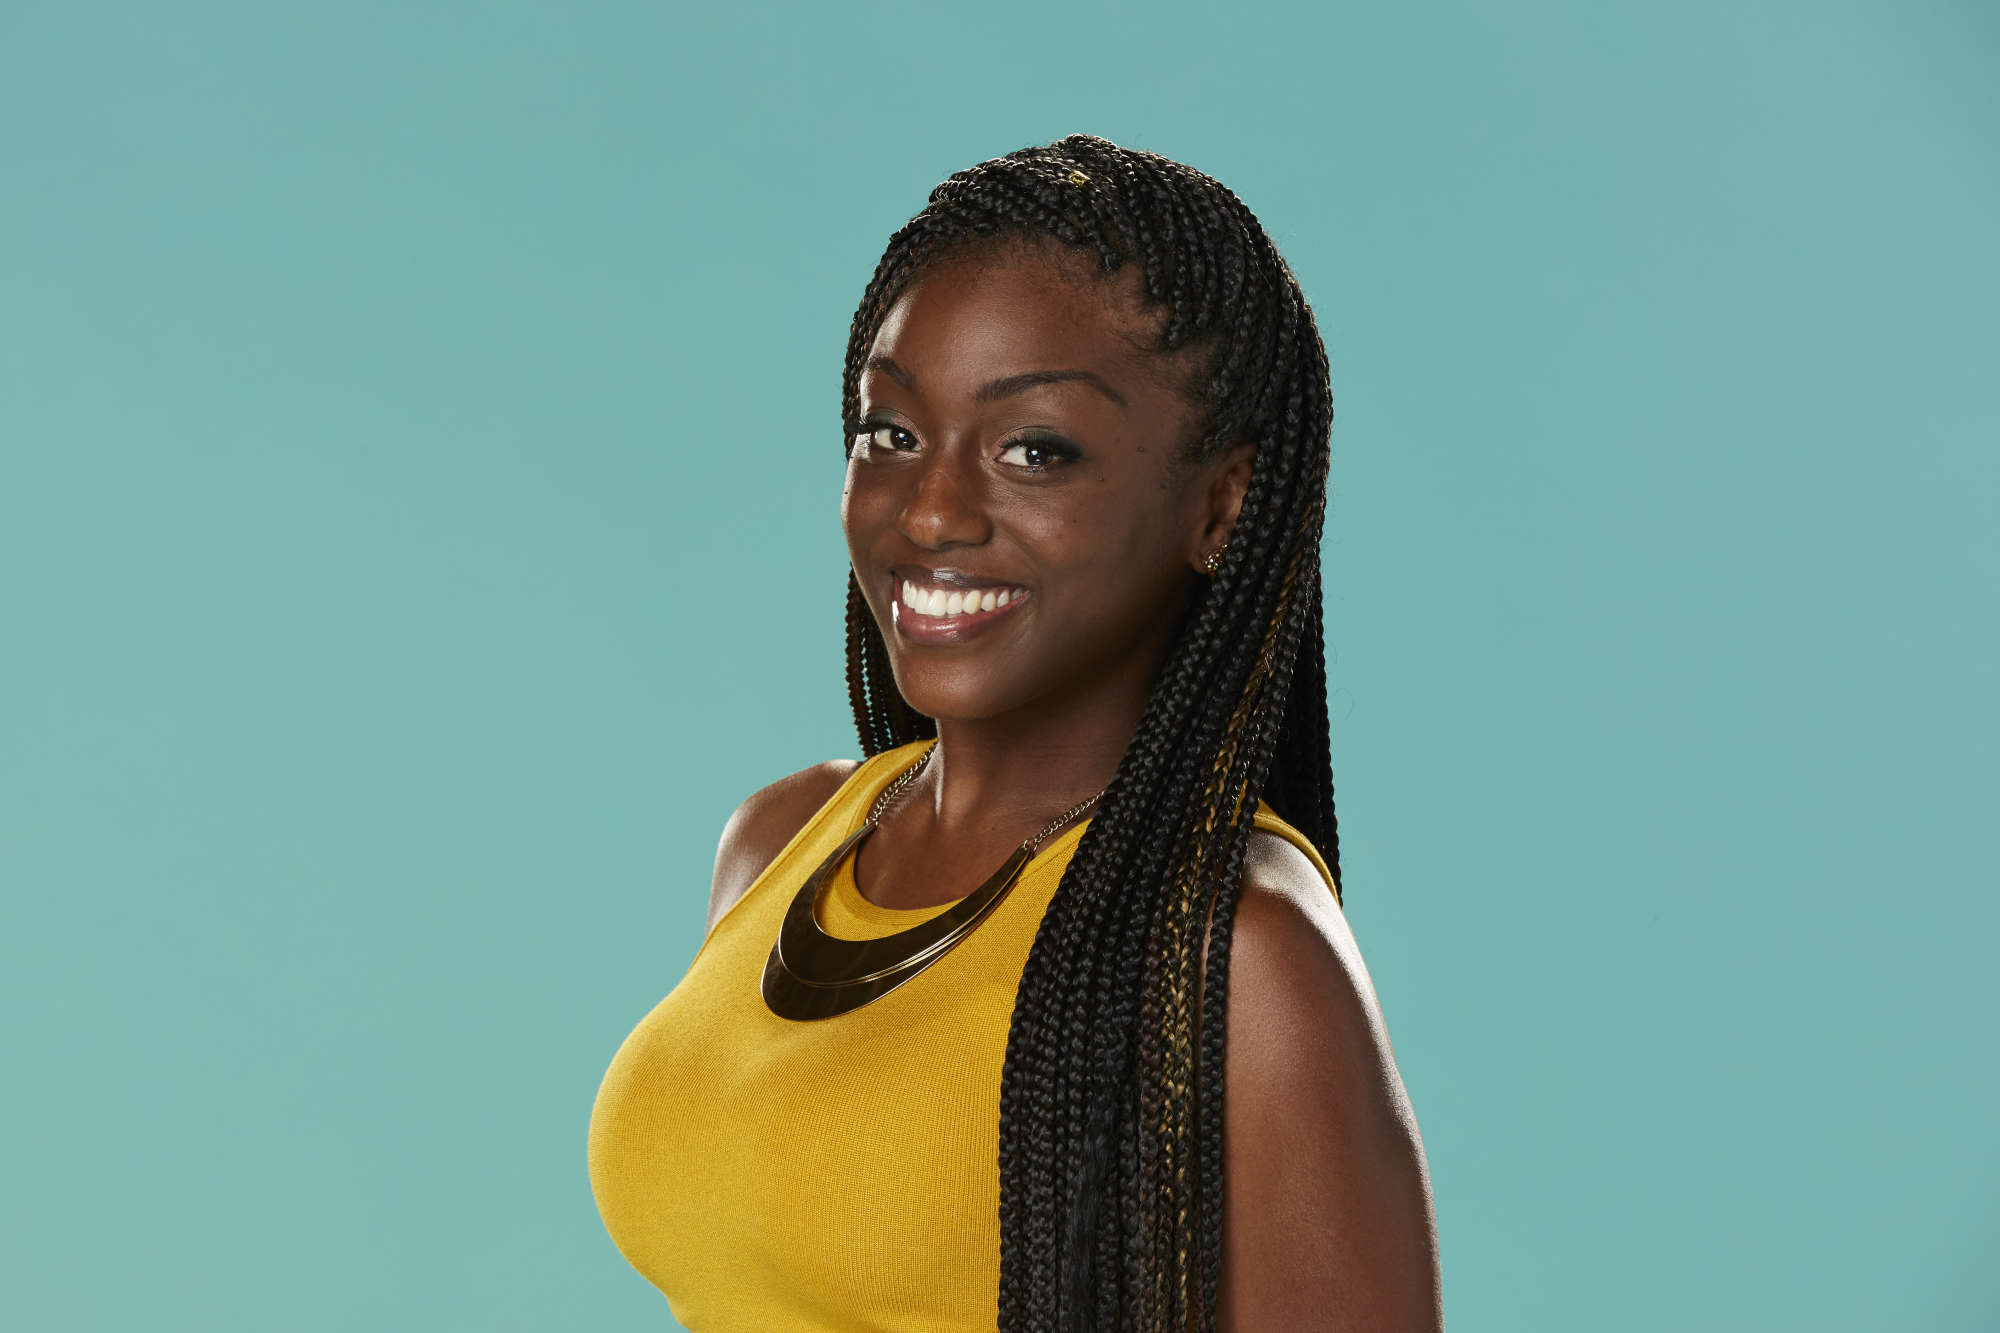 Da'Vonne Rogers of the CBS series Big Brother